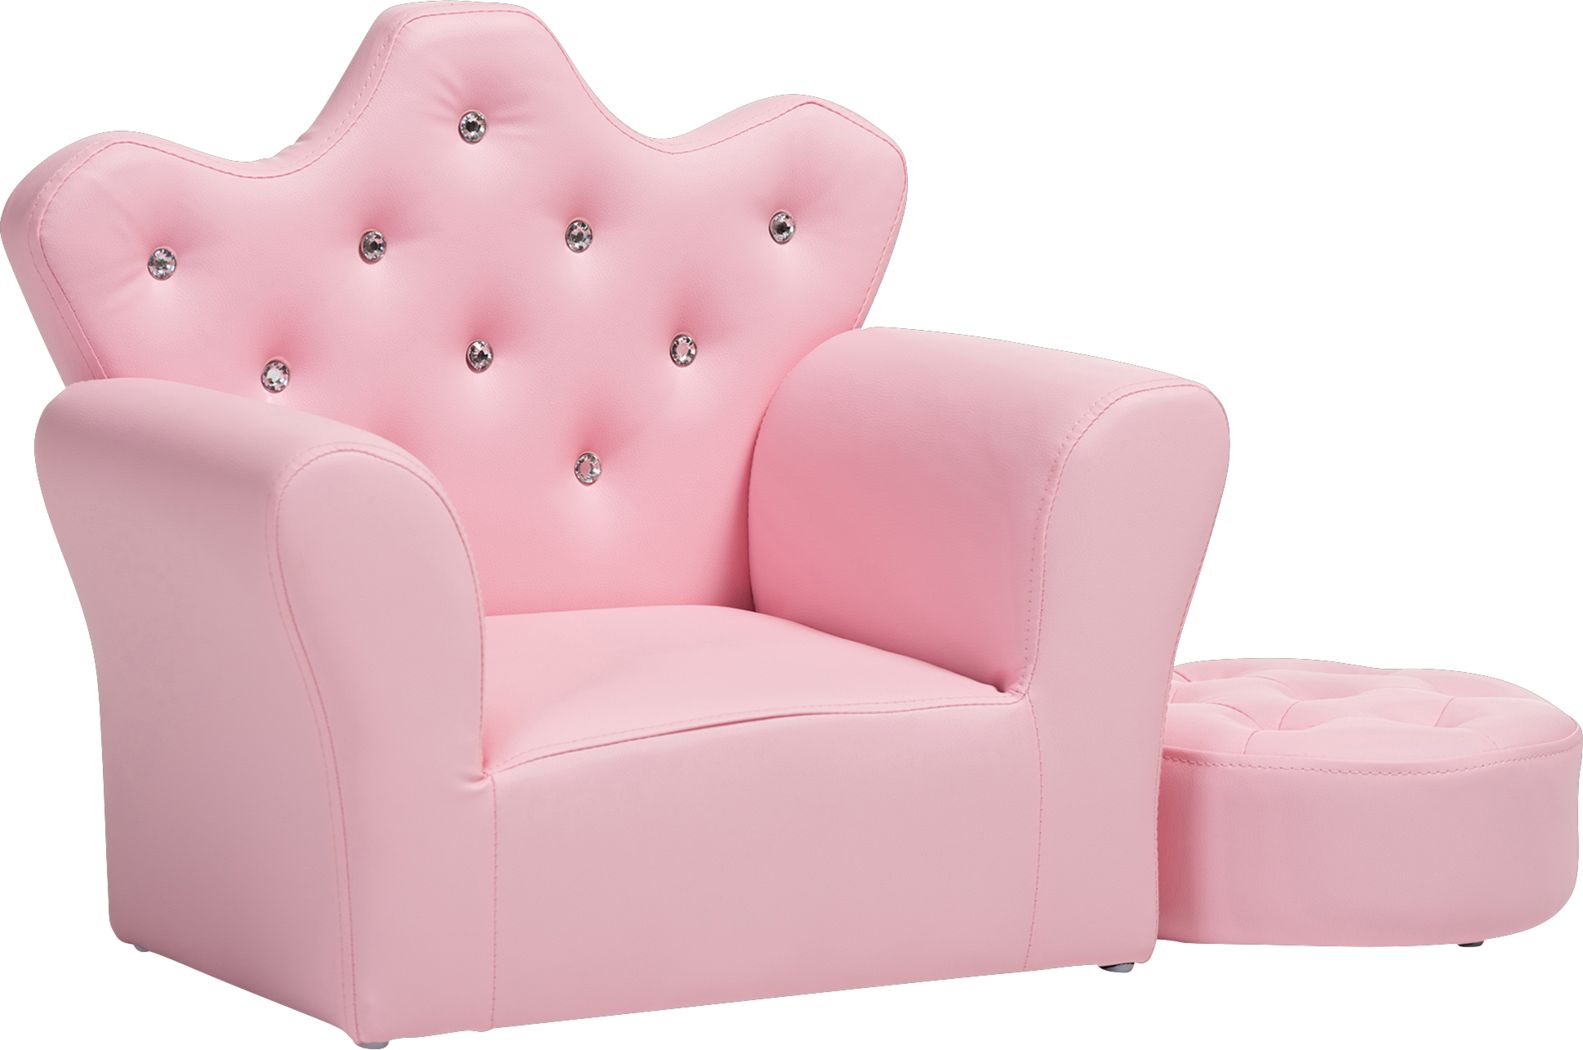 Kids Eblen Pink Accent Chair 38292366 Image Item?cache Id=ee884aa2e063c61453689587ce4dd803